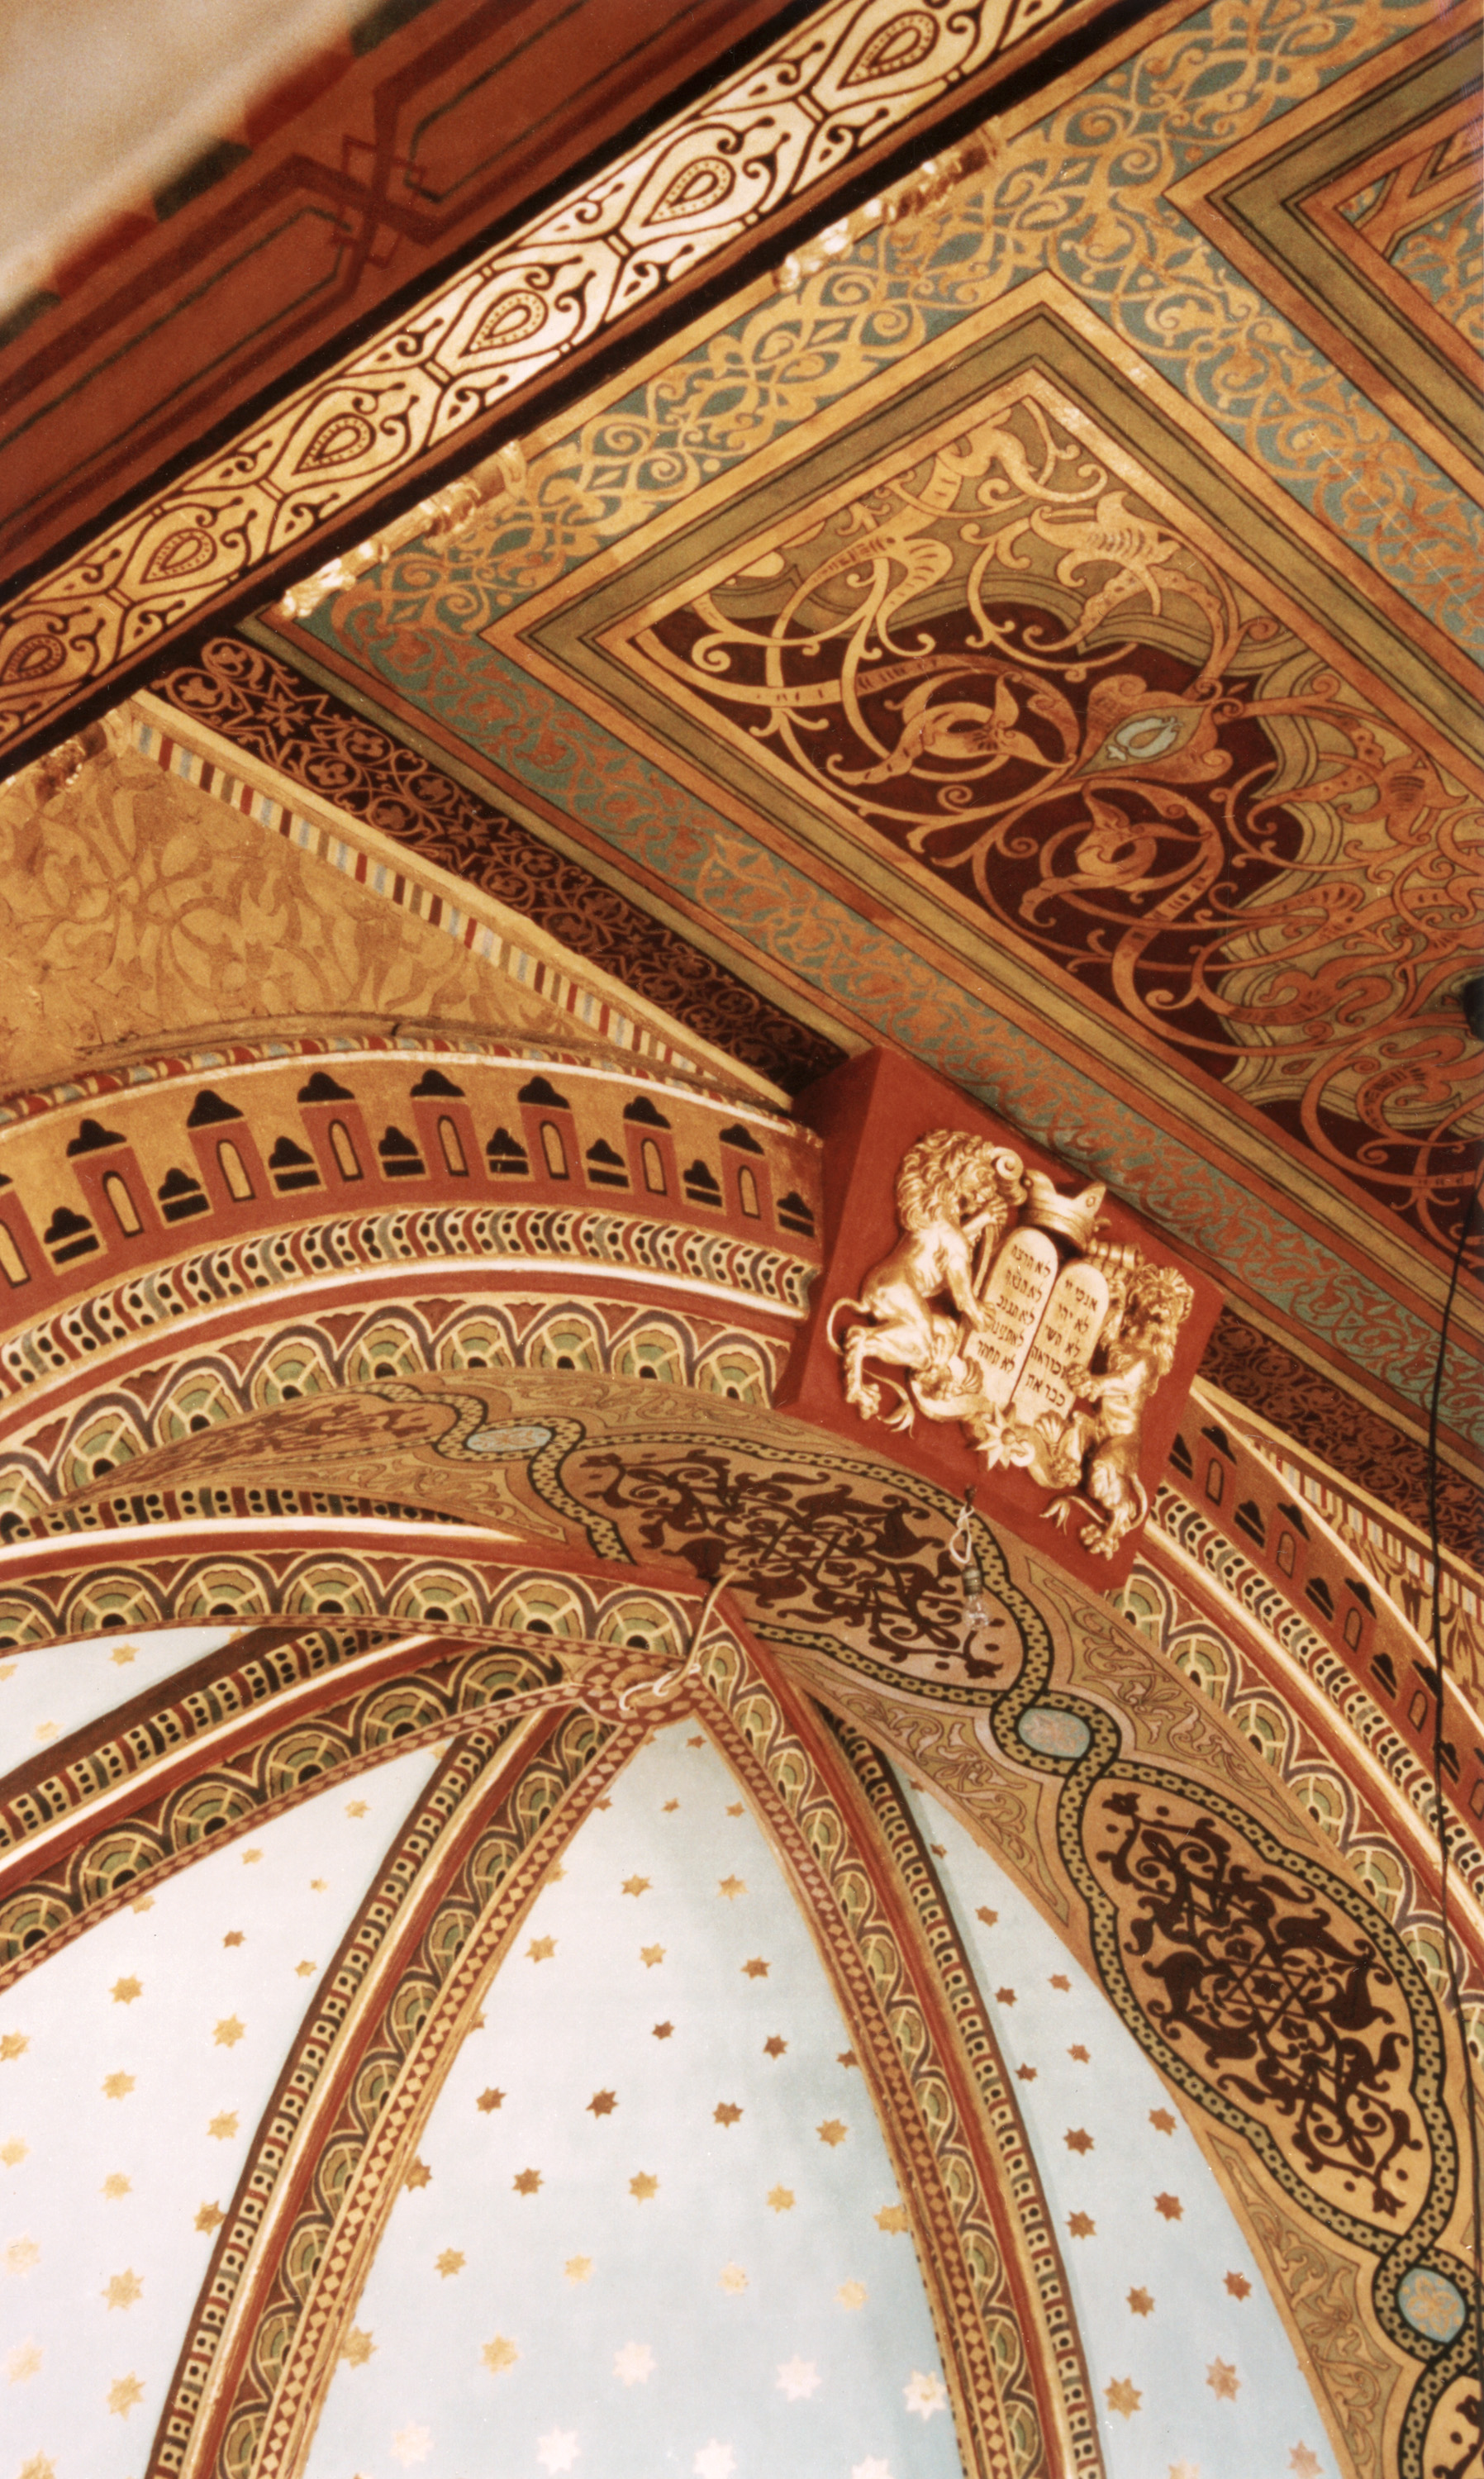 Country: PolandSite: Tempel SynagogueCaption: Detail of the polychrome arch before apse, showing in the keystone a pair of lions supporting a Decalogue in gilded bas-relief.Image Date: 2000Photographer: WMFProvenance: Site VisitOriginal: from print collection